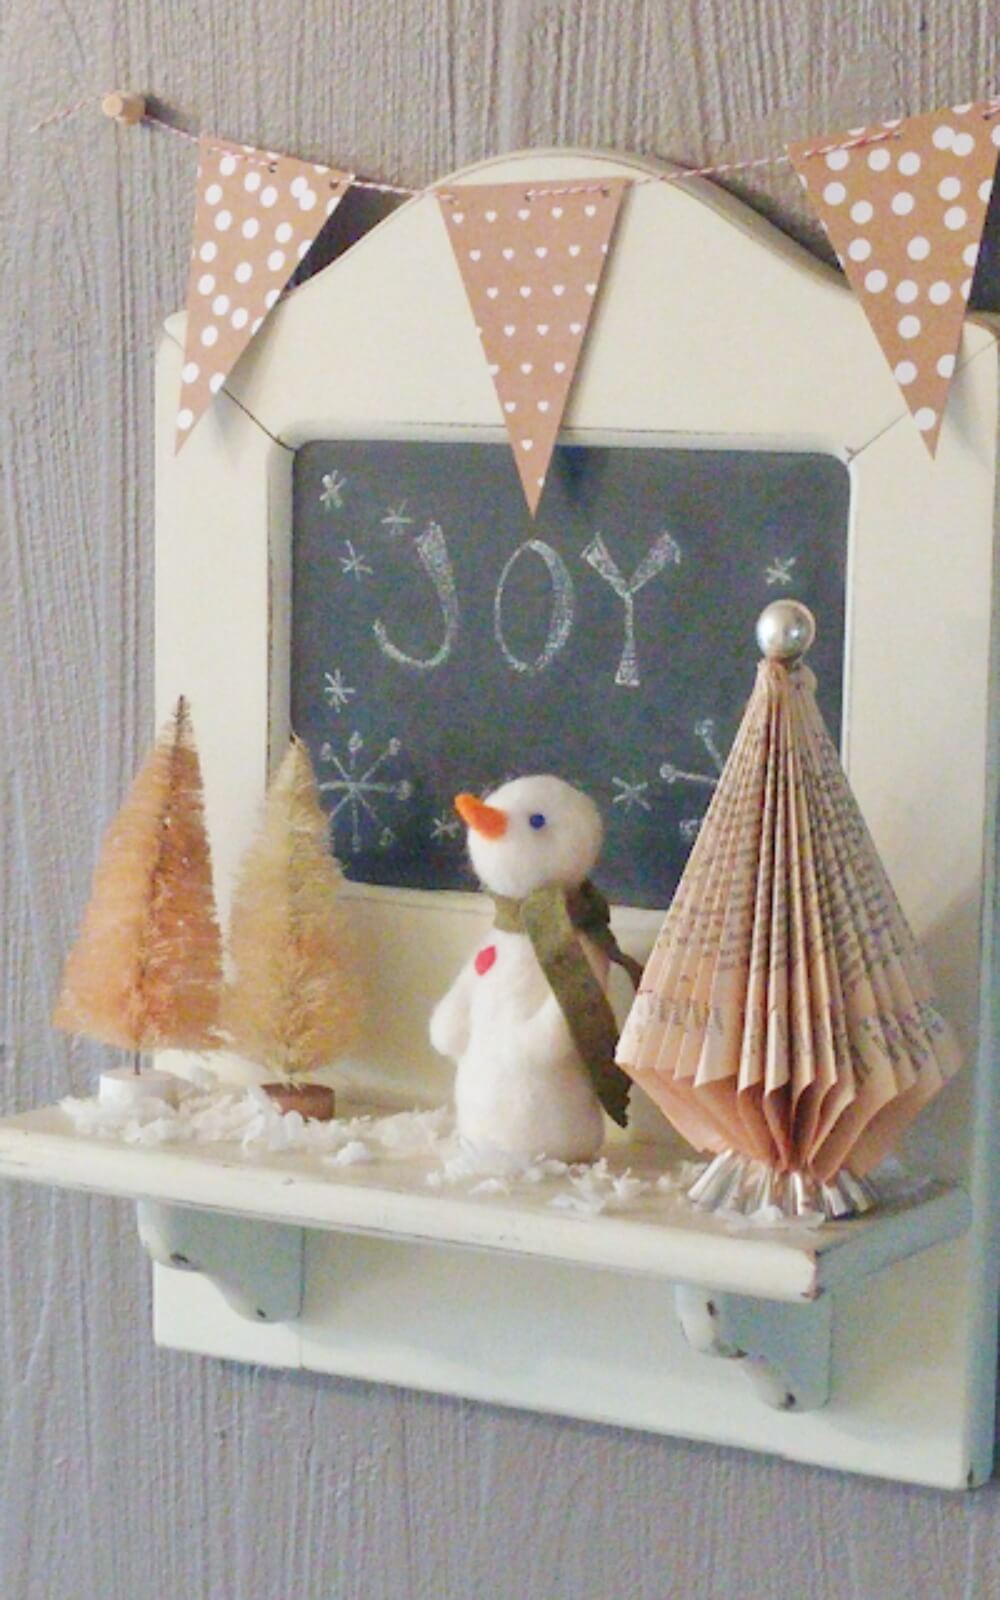 How to Make a Needle Felted Snowman